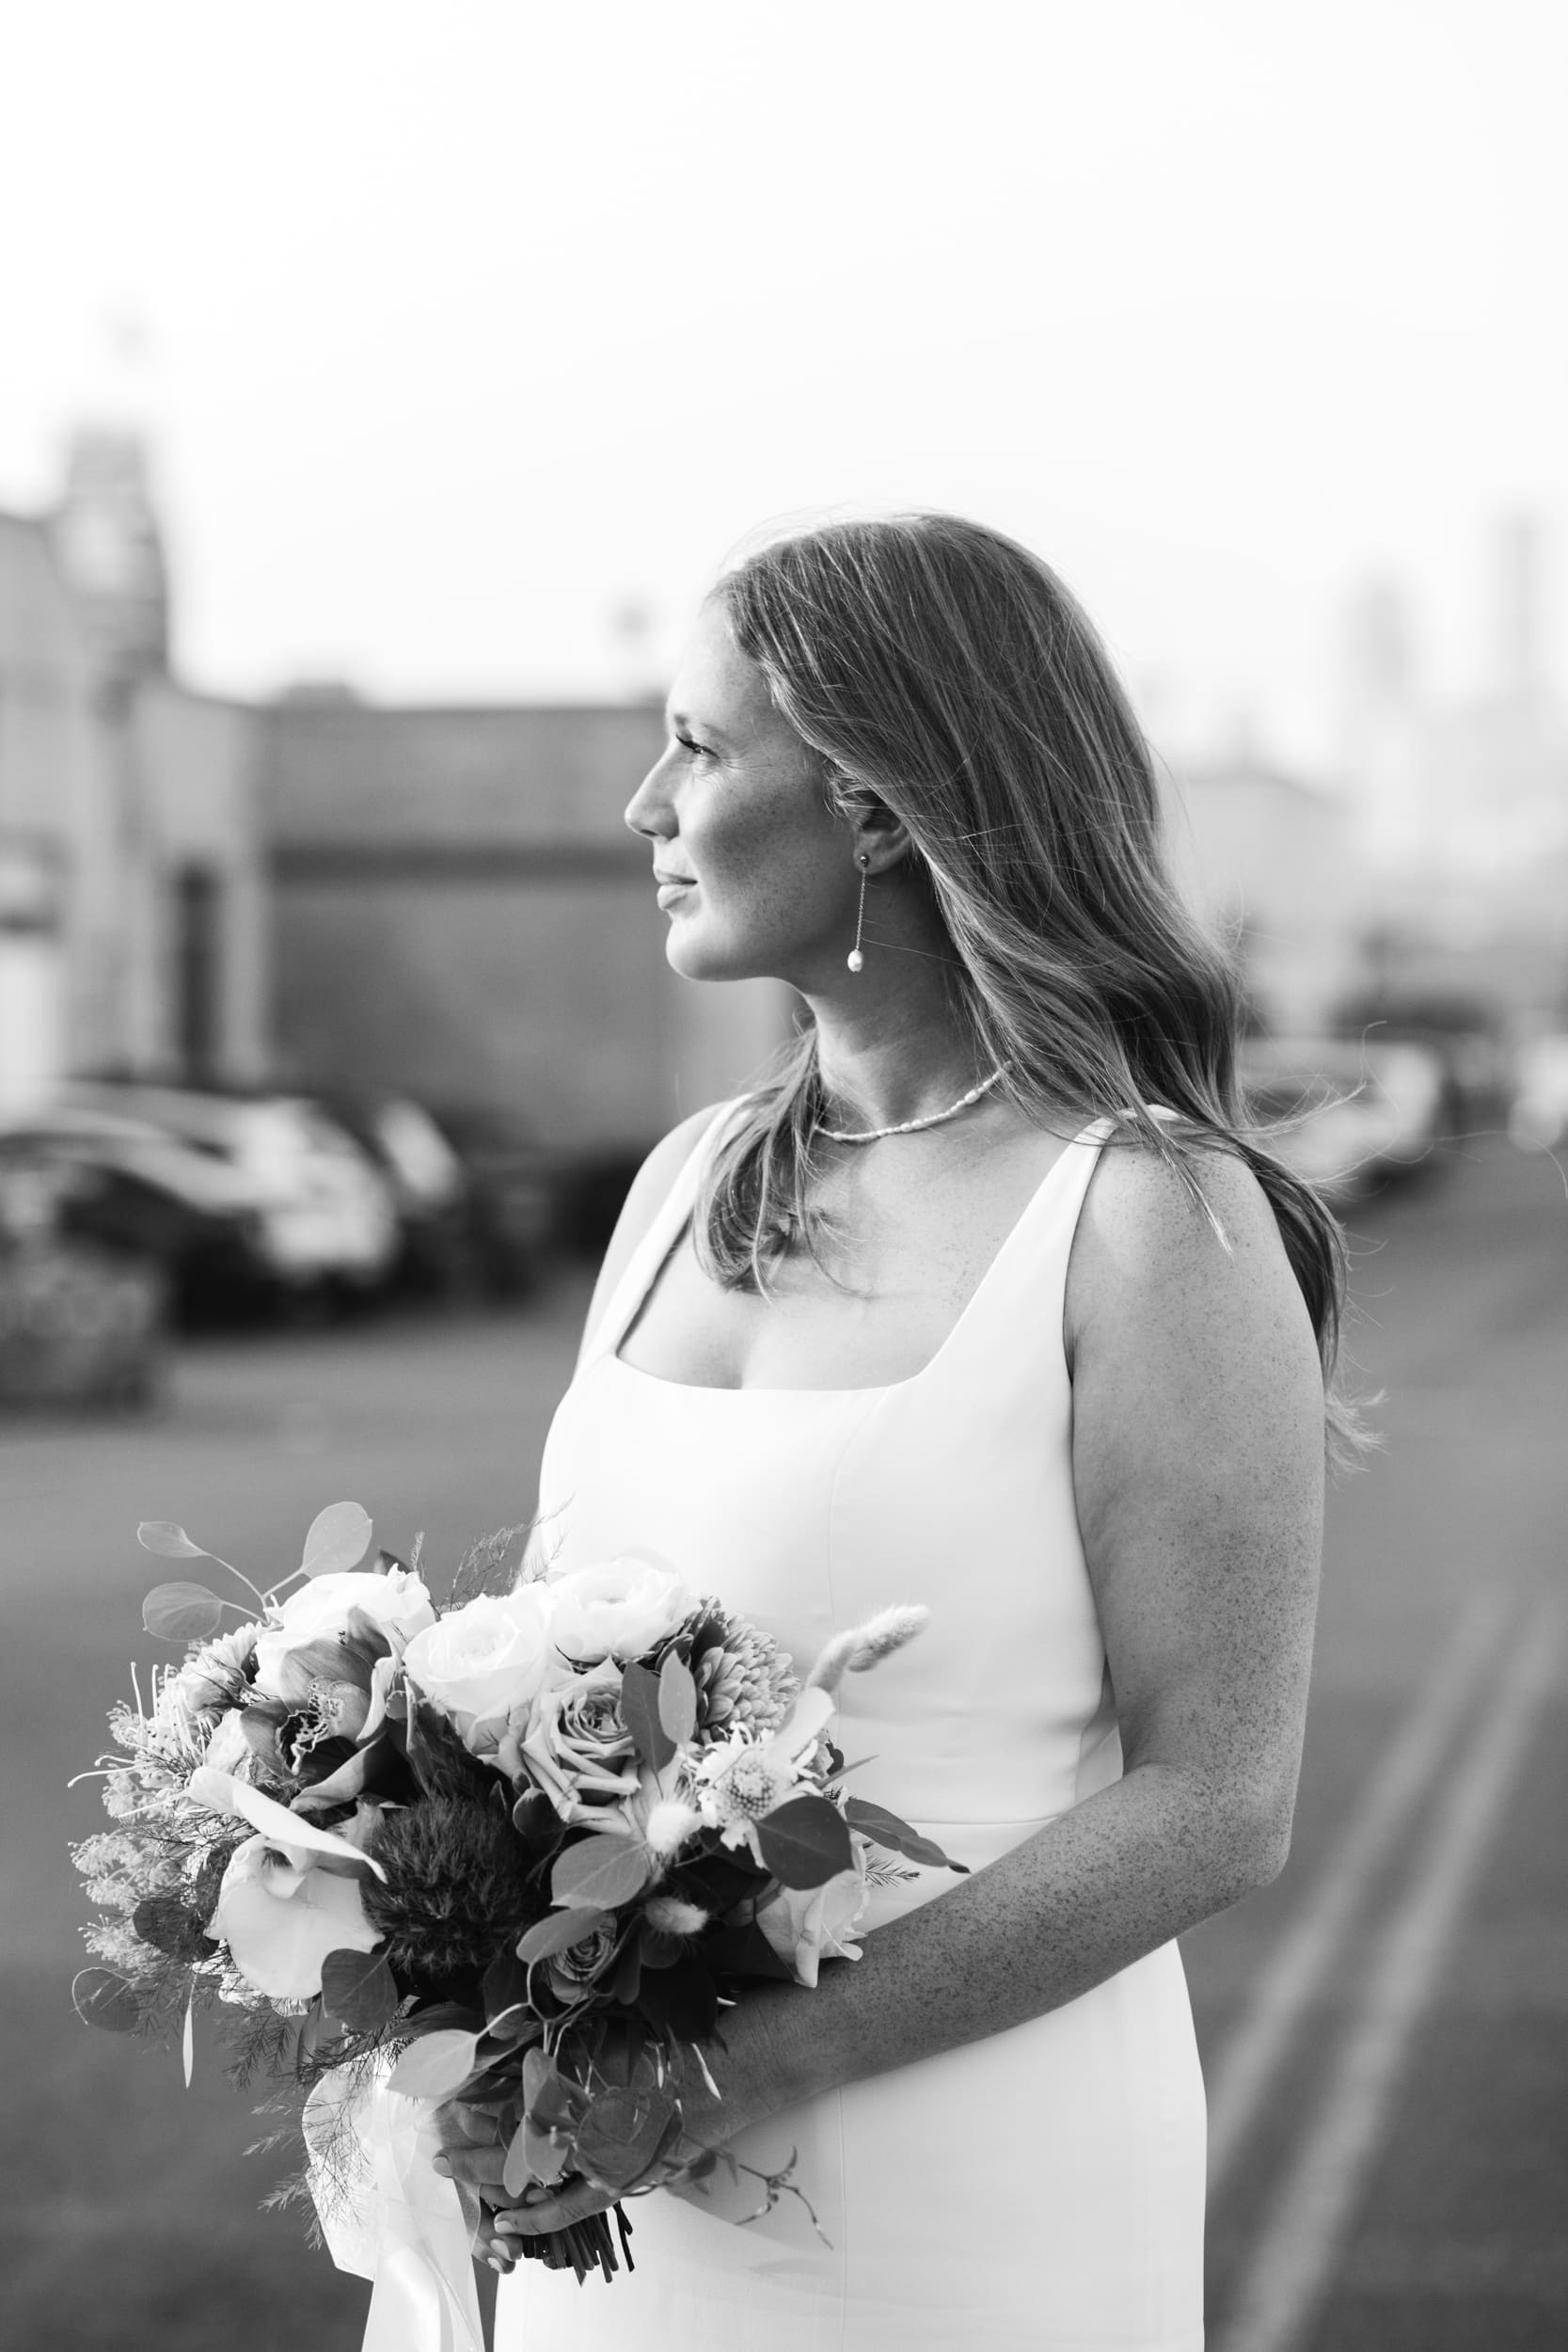 black and white photos wedding, red headed bride, black and white bridal portraits, blurry wedding photos, artsy wedding photos